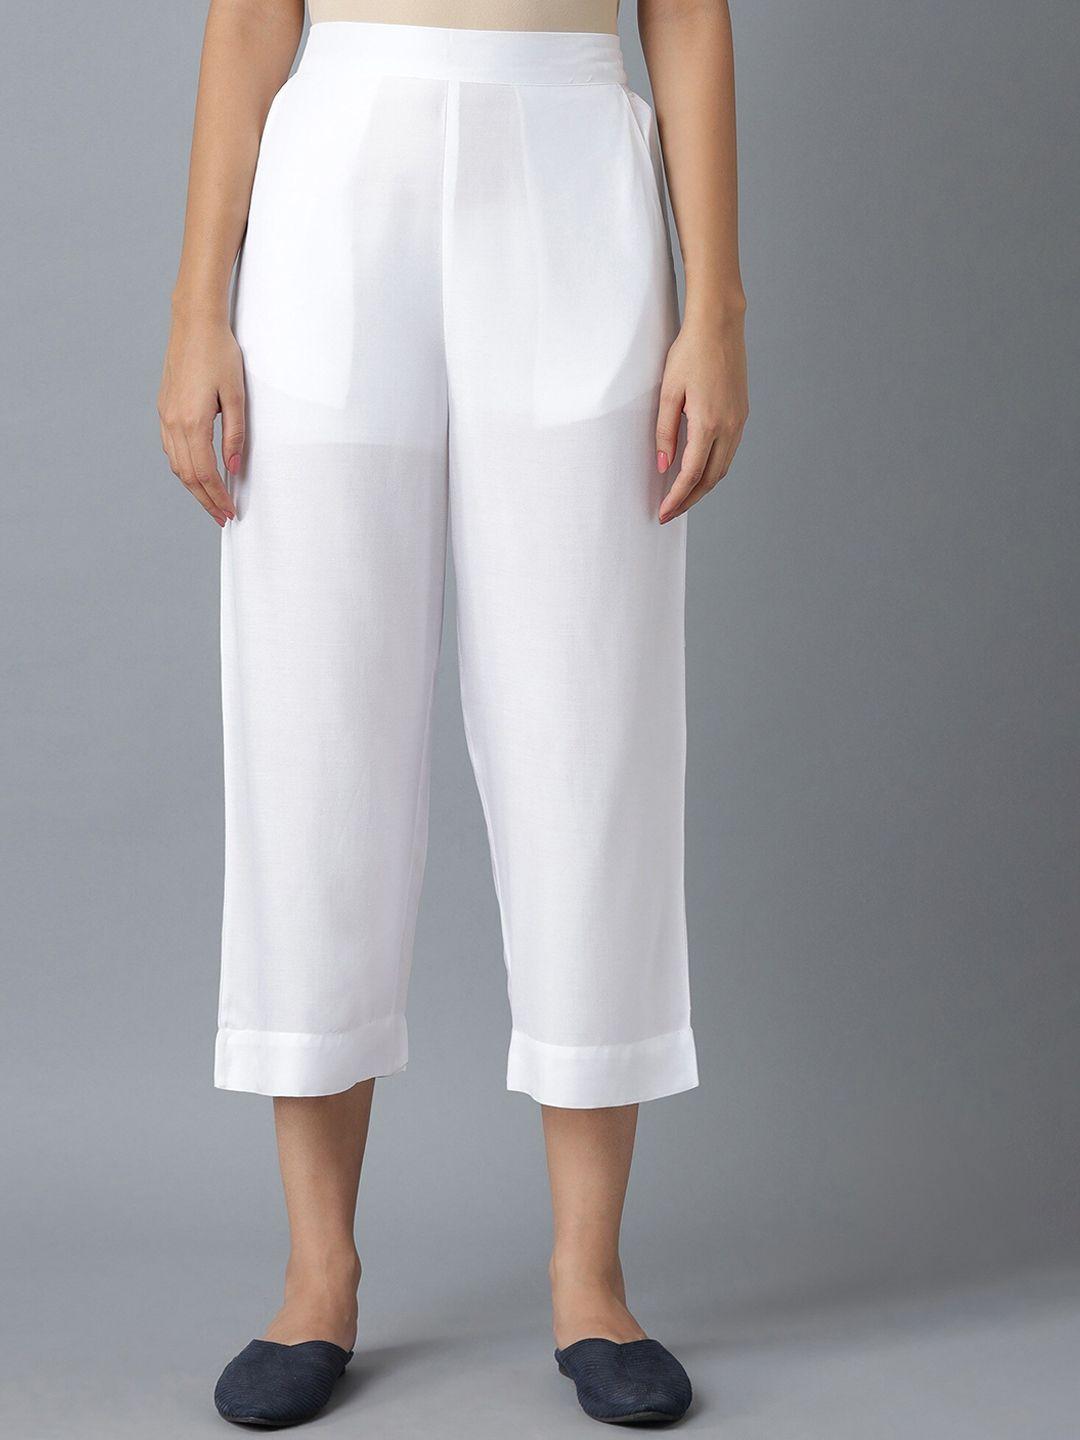 elleven women white solid tapered fit culottes